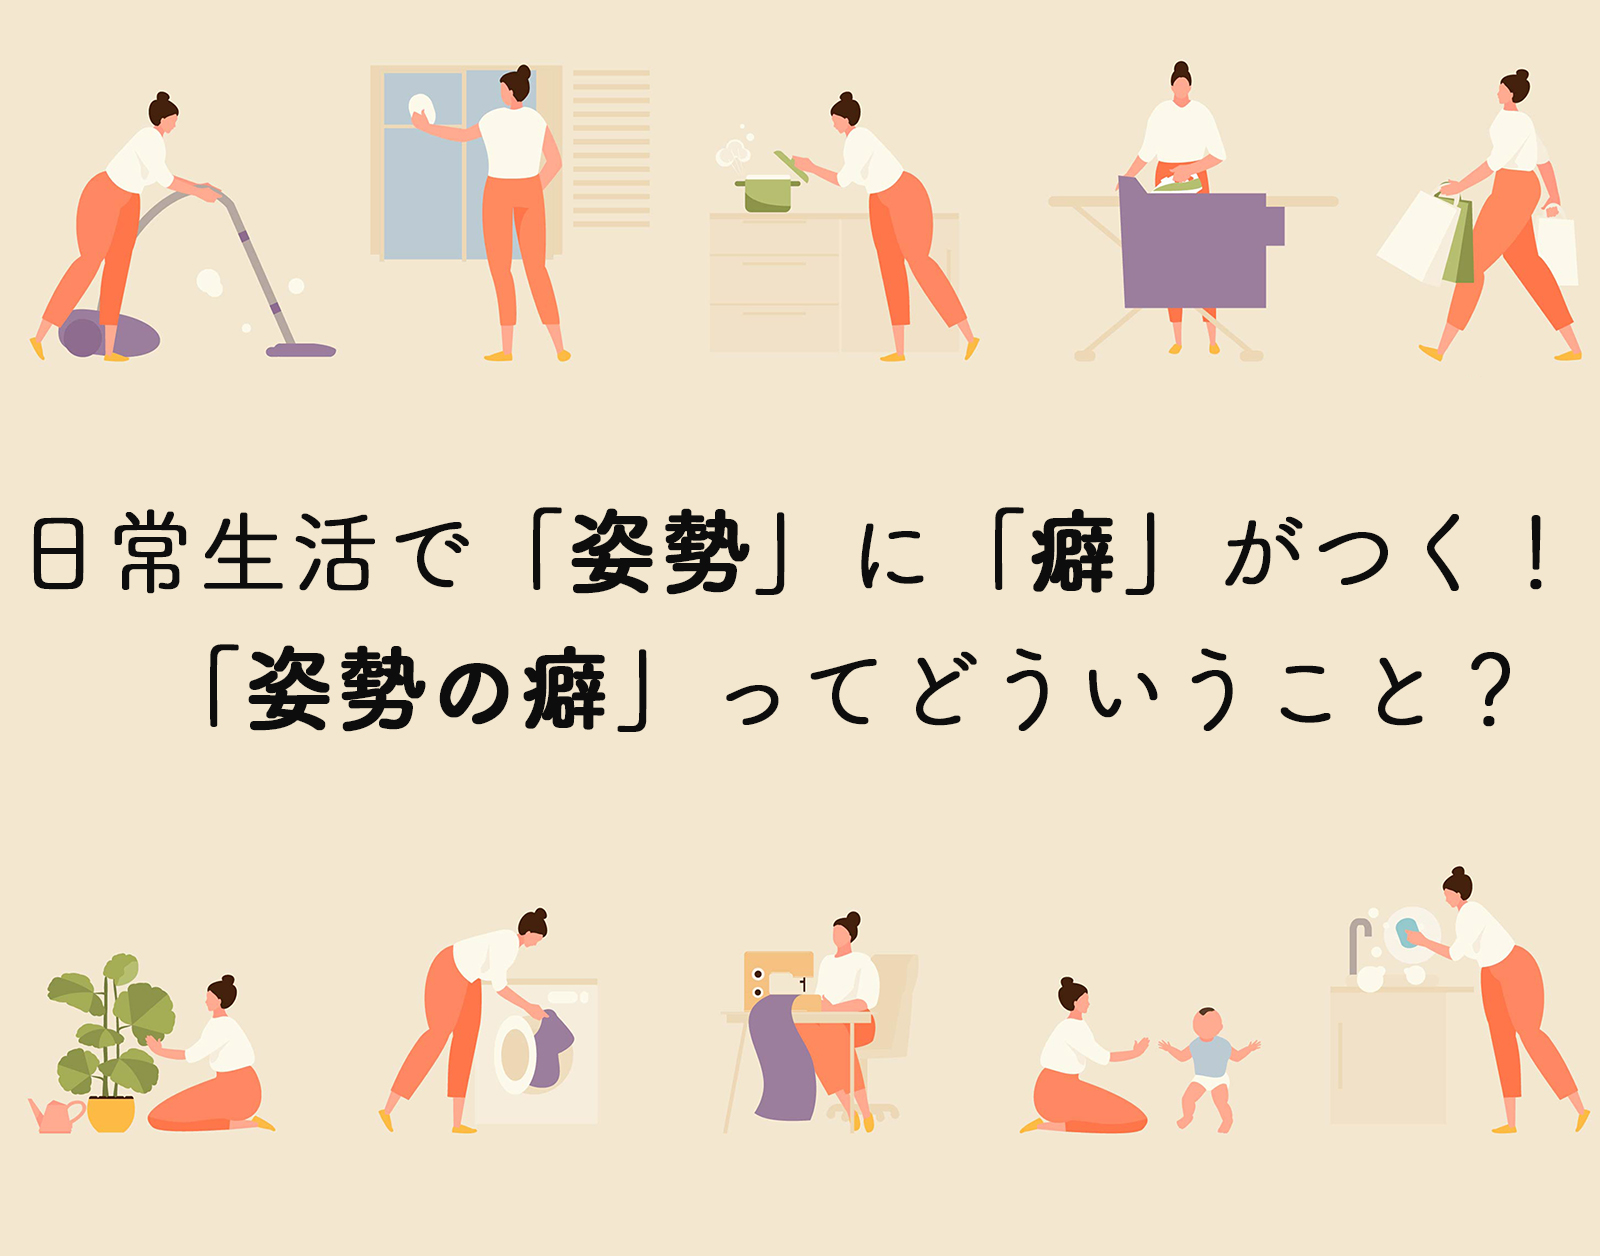 Read more about the article 日常生活で「姿勢」に「癖」がつく！「姿勢の癖」とは？